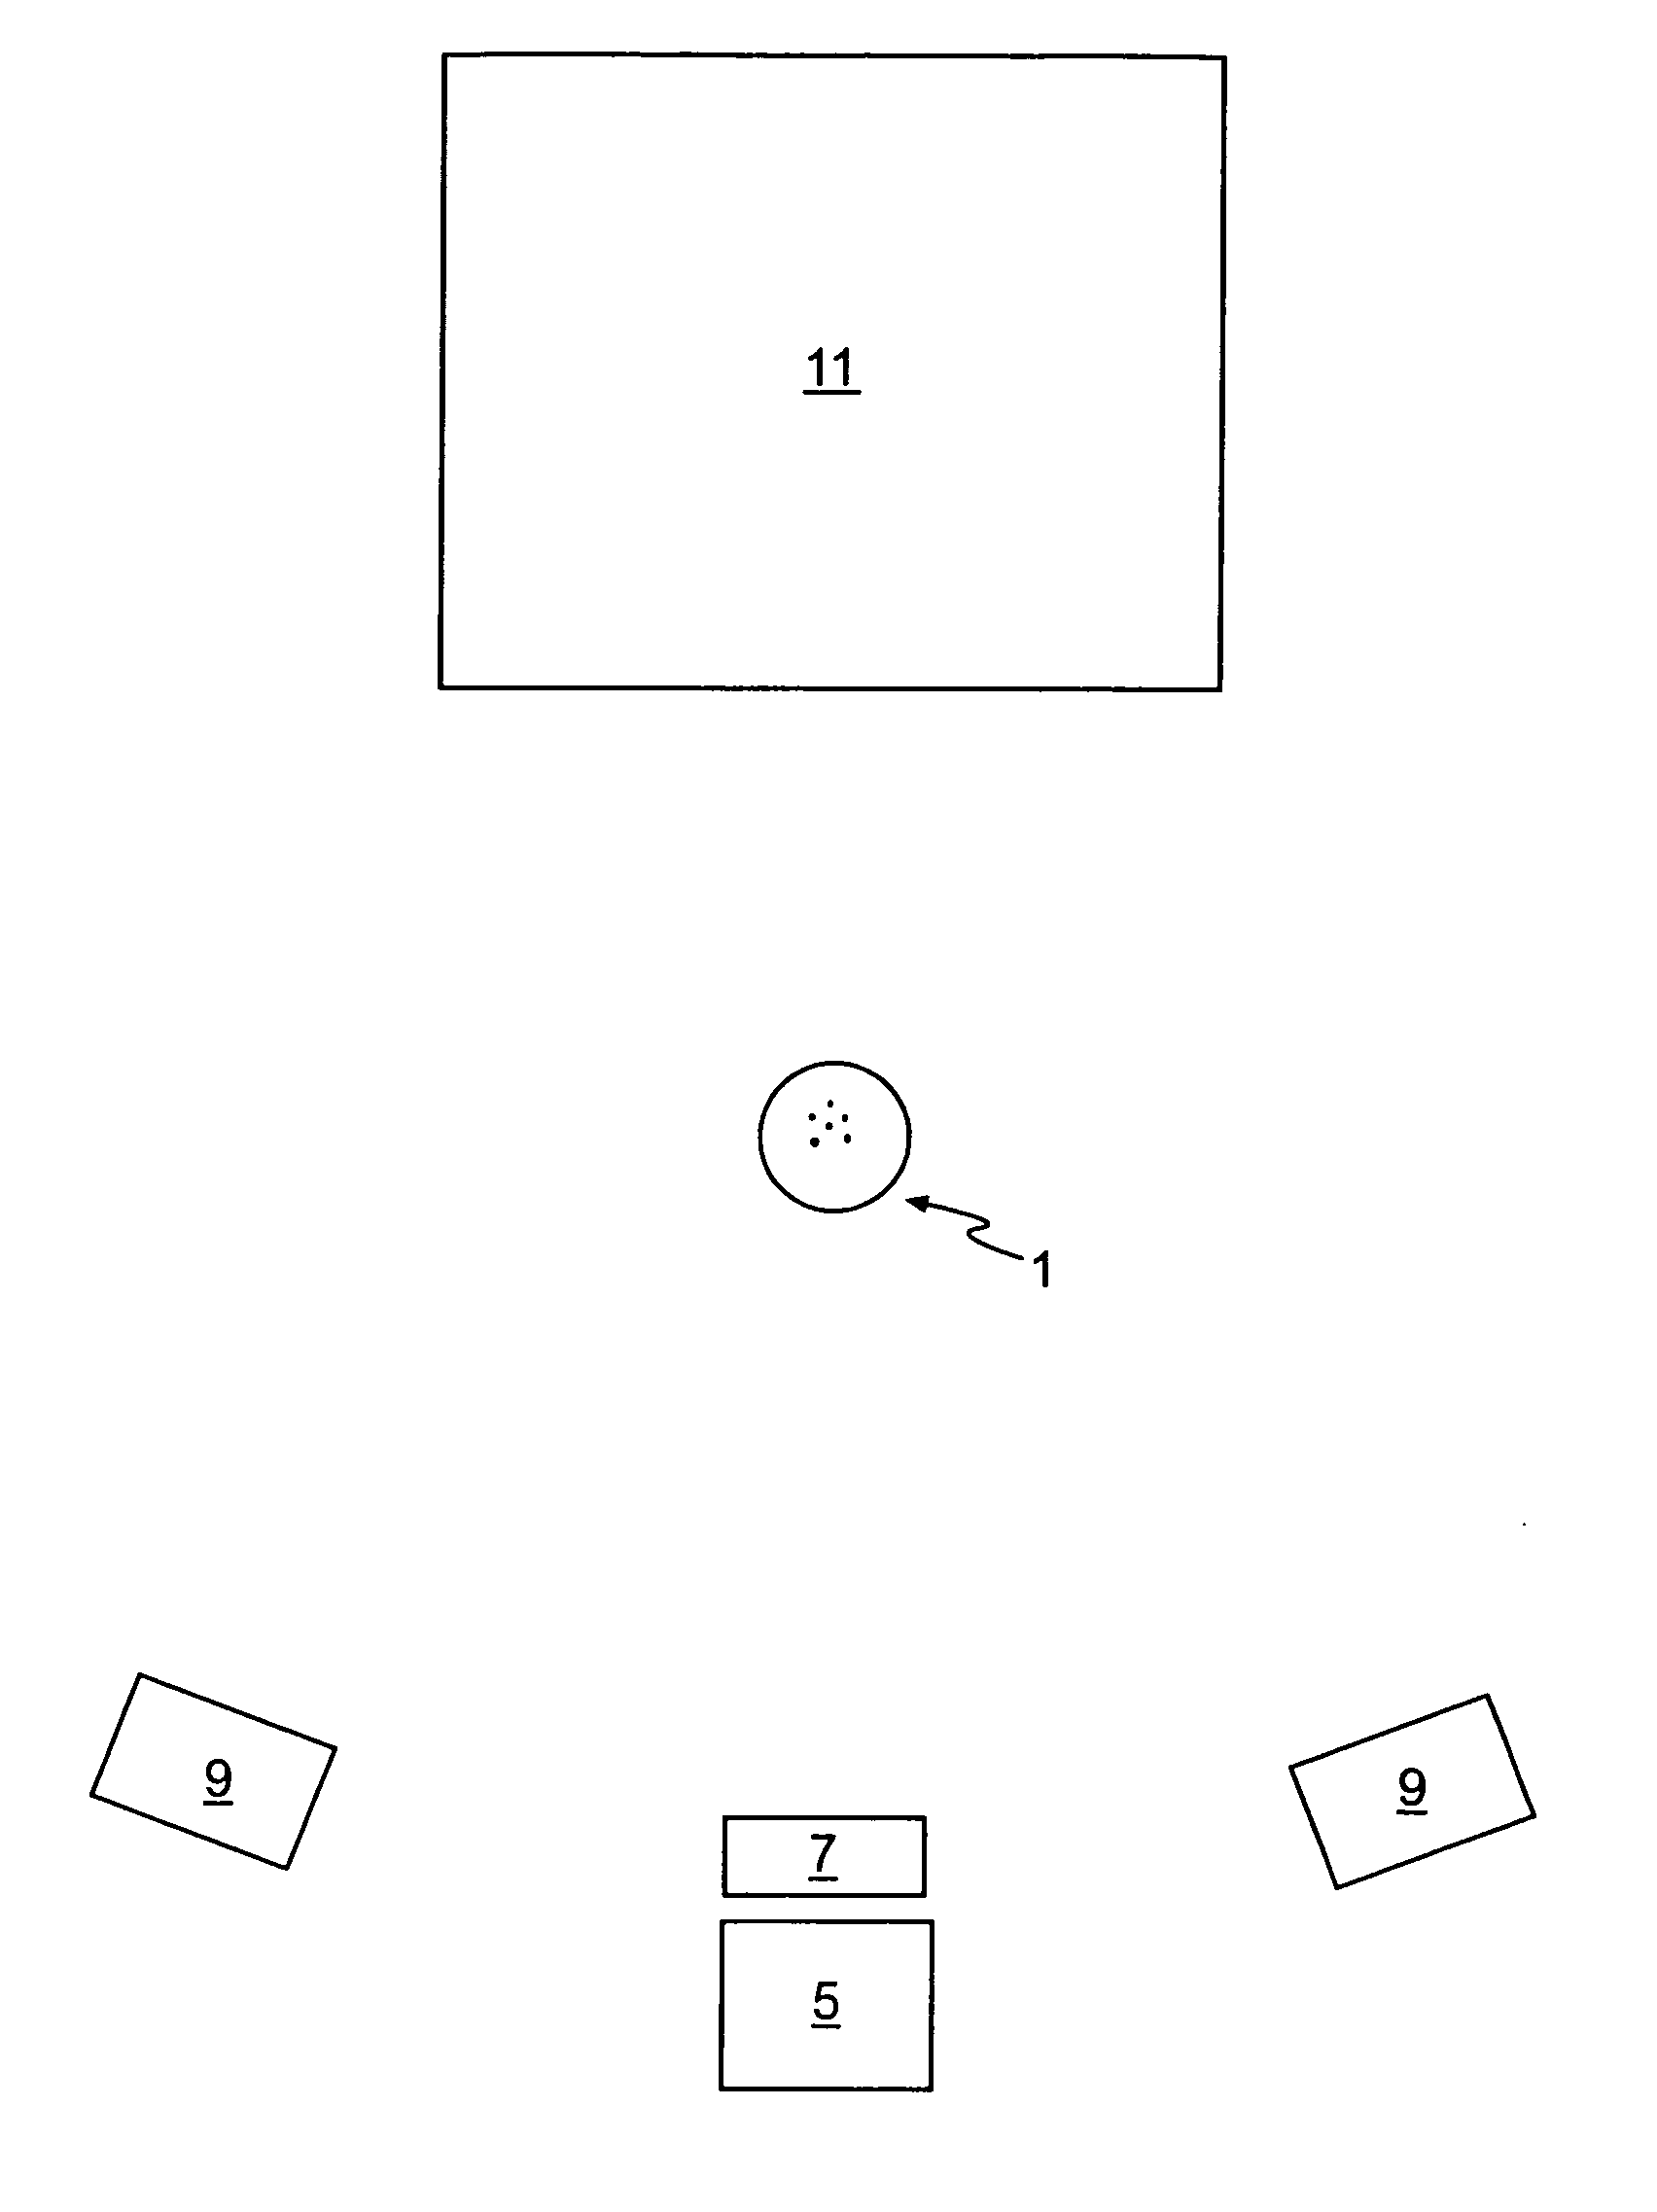 Method and apparatus for measuring ball launch conditions